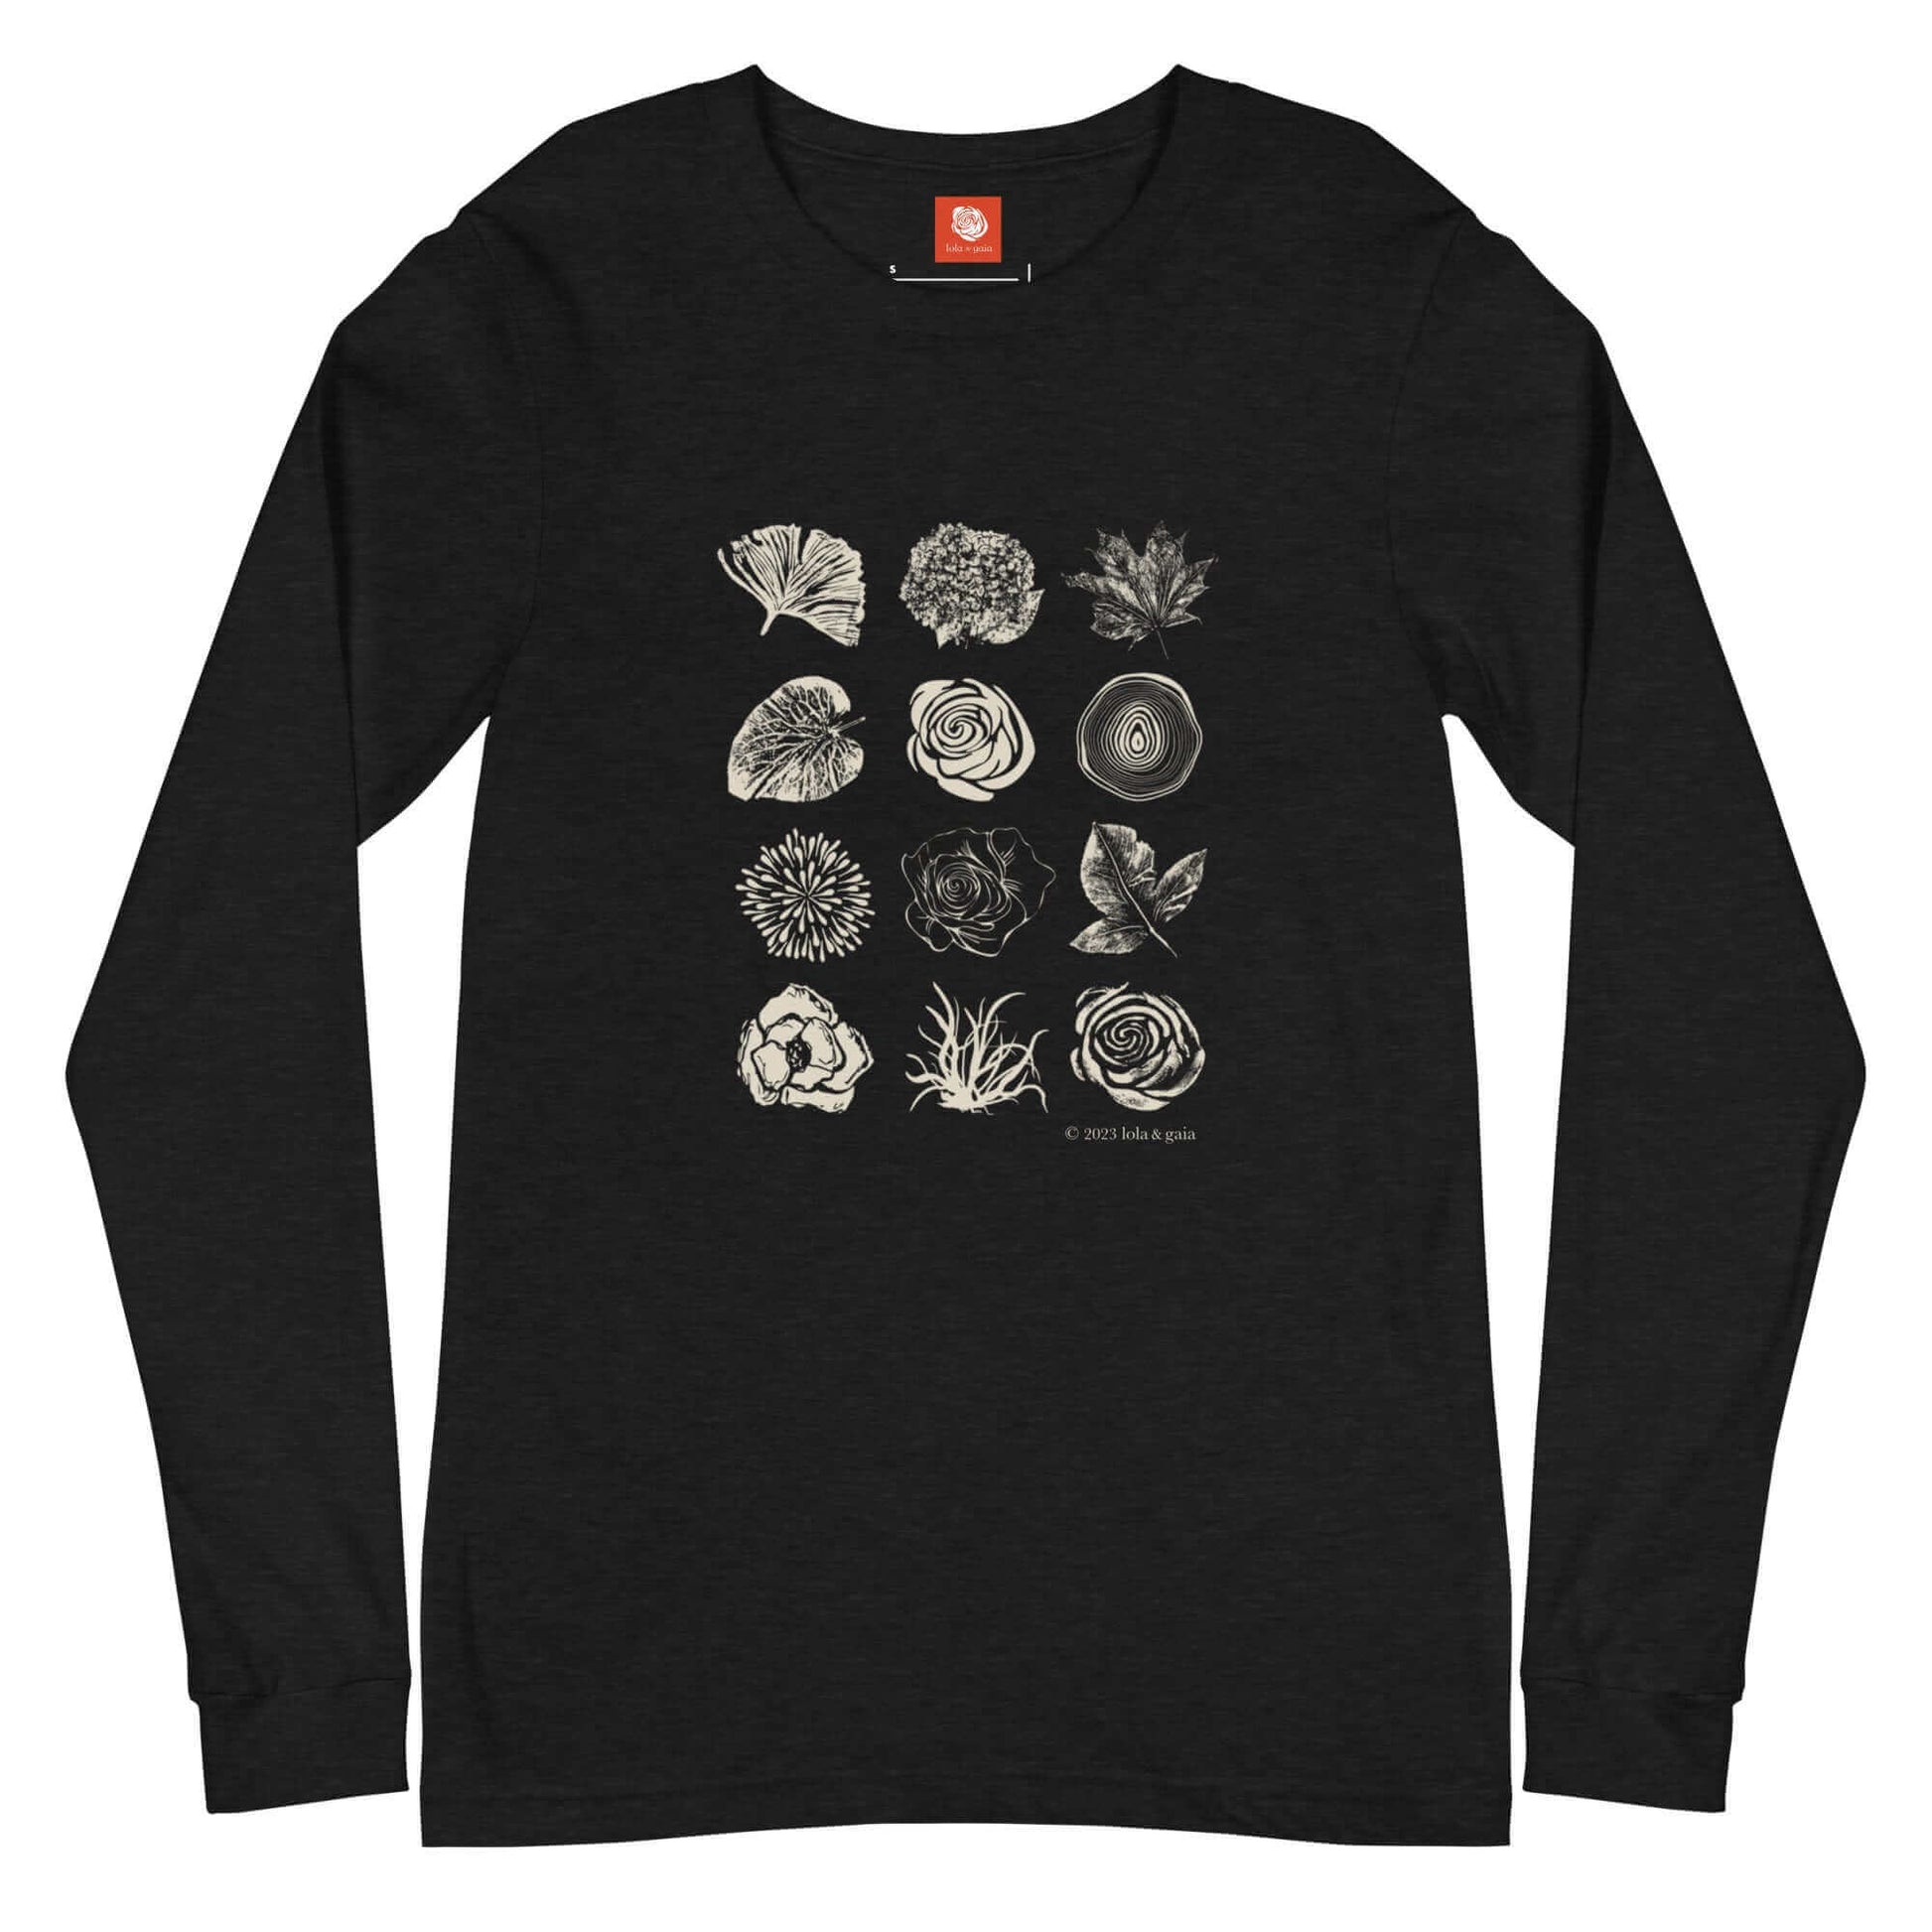 L&G Icons Long Sleeve Tee, Black front view